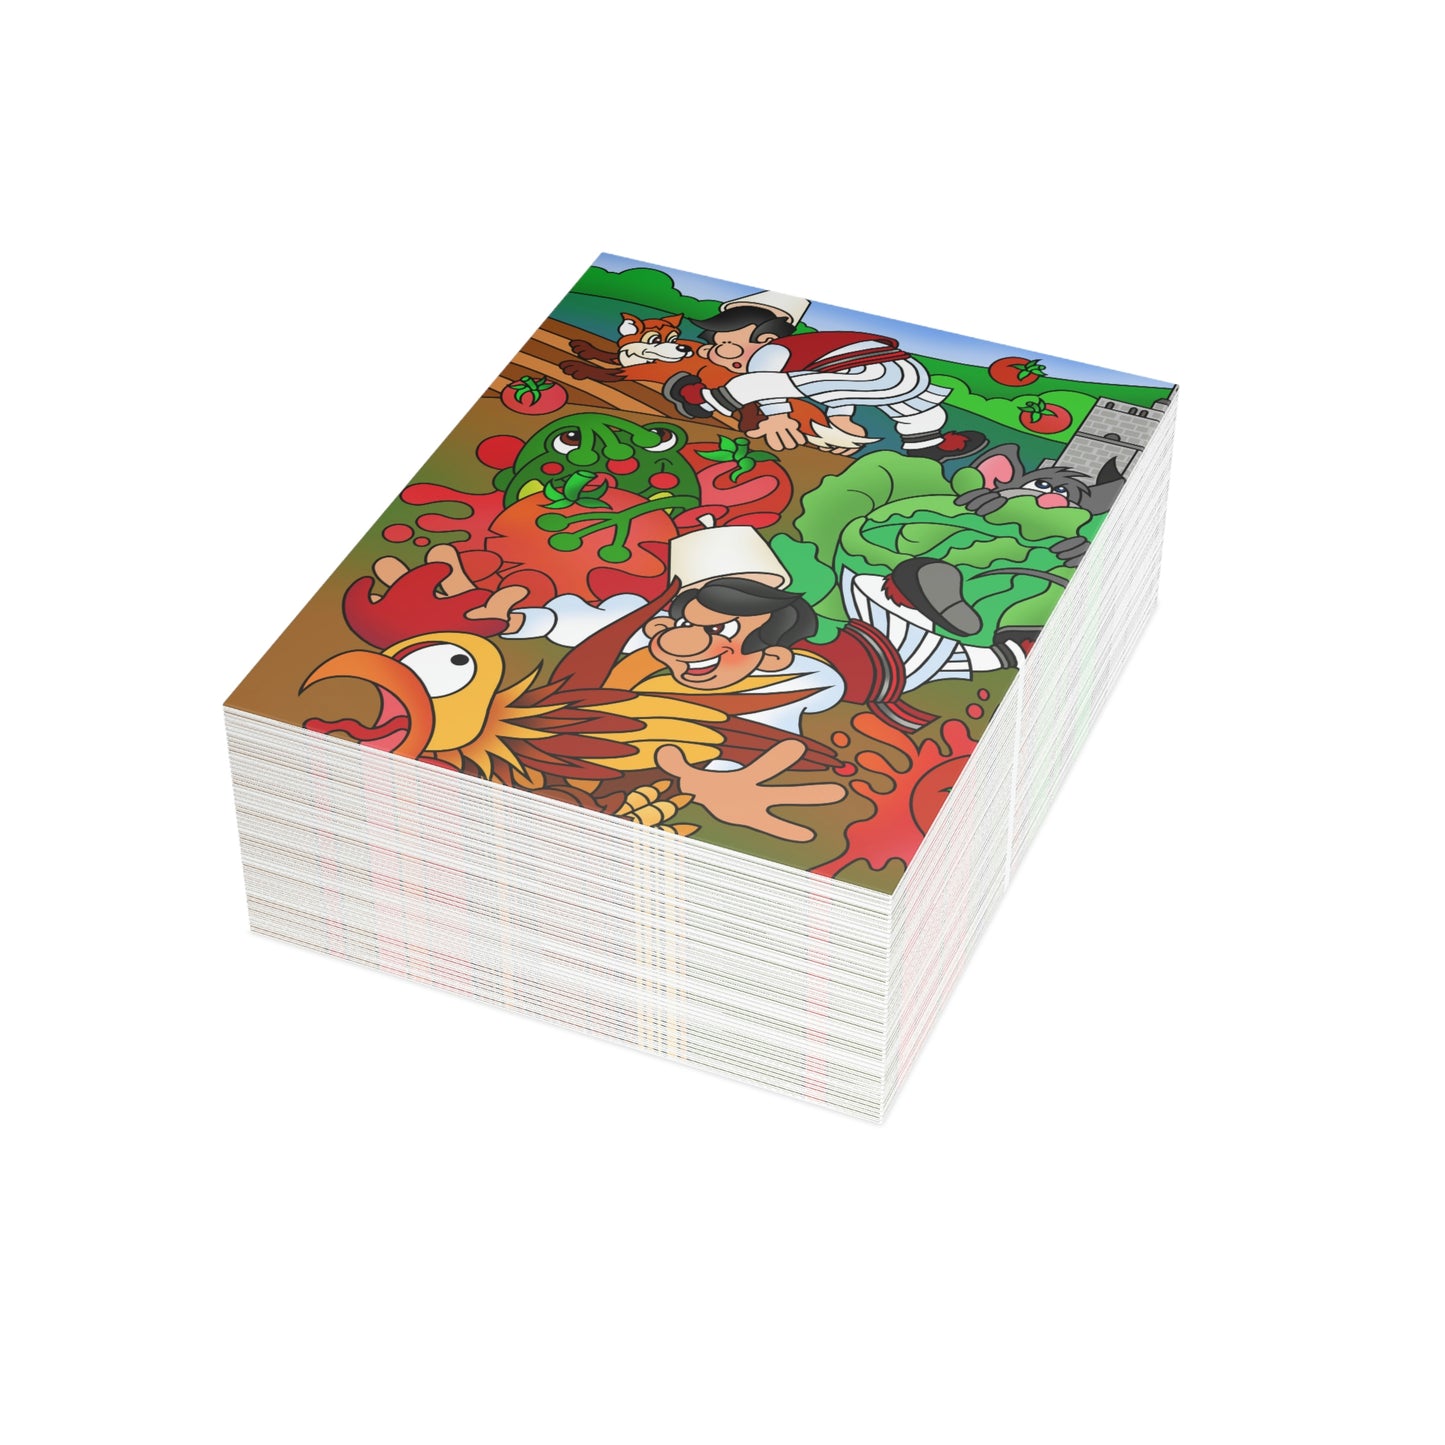 The Half Rooster! Greeting Cards (1, 10, 30, and 50pcs)